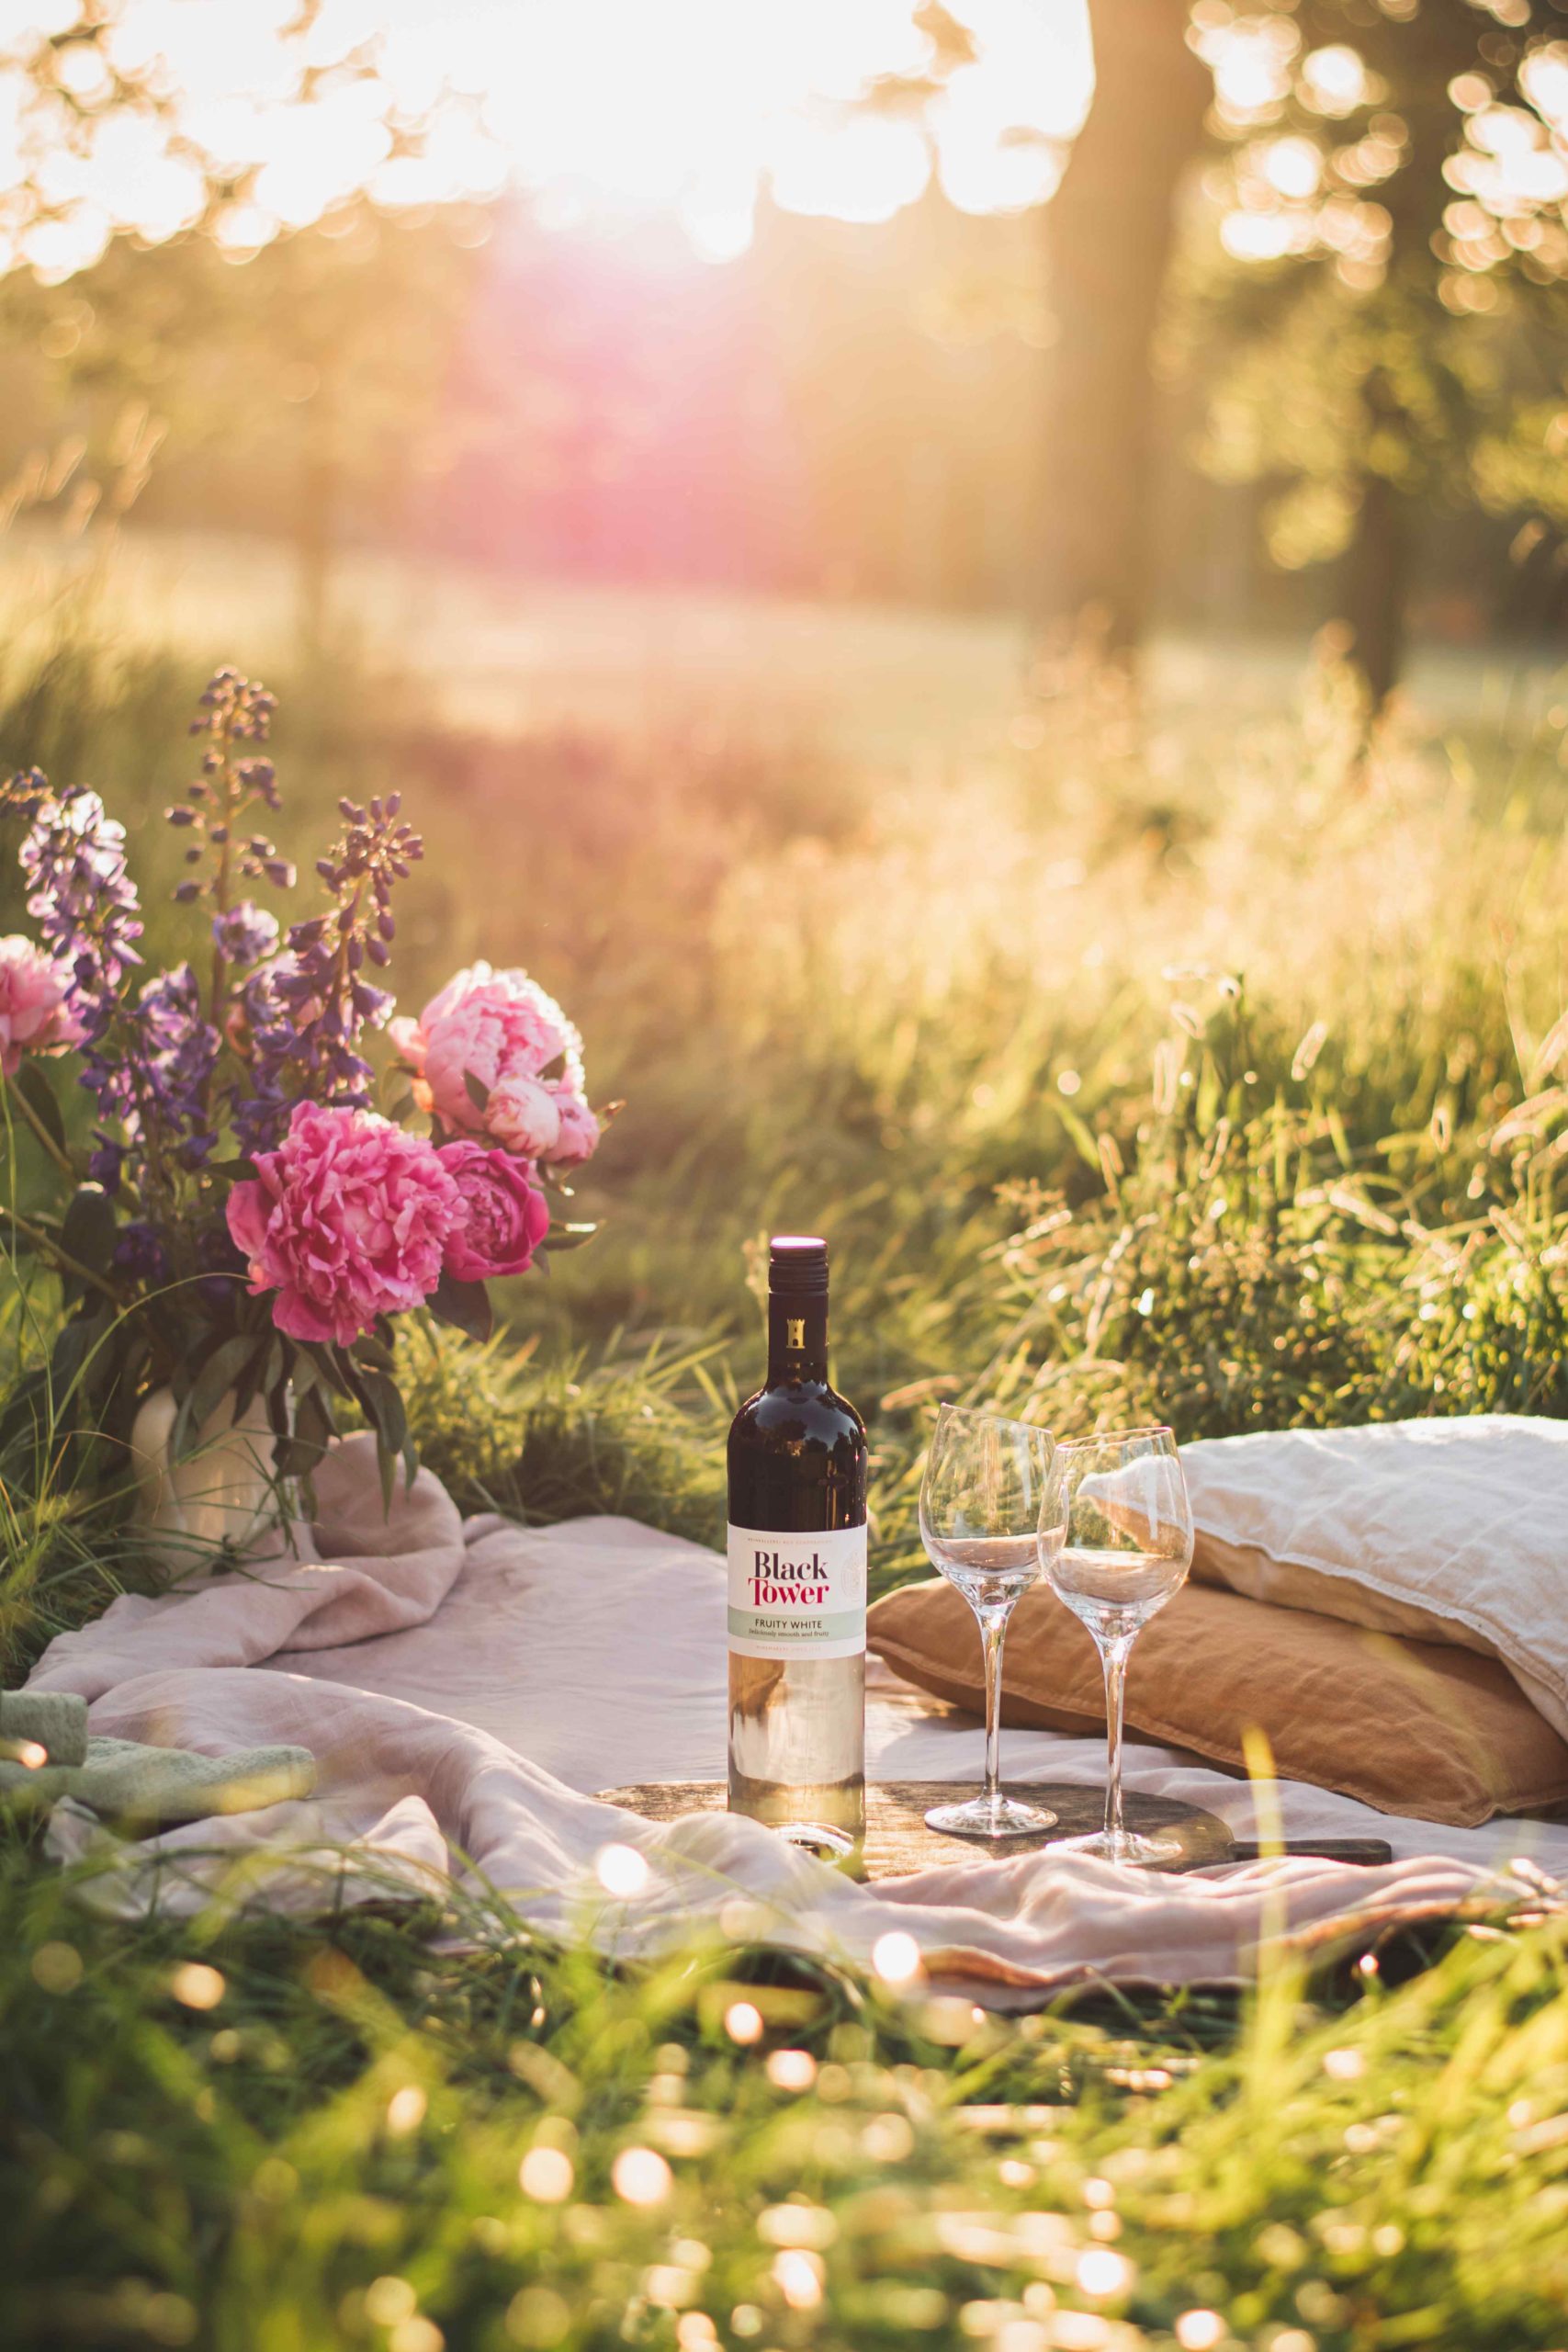 Bottle of Black Tower Wine in a picnic with wine glasses in a field with the sun shining, produced by YesMore wine digital marketing consultancy